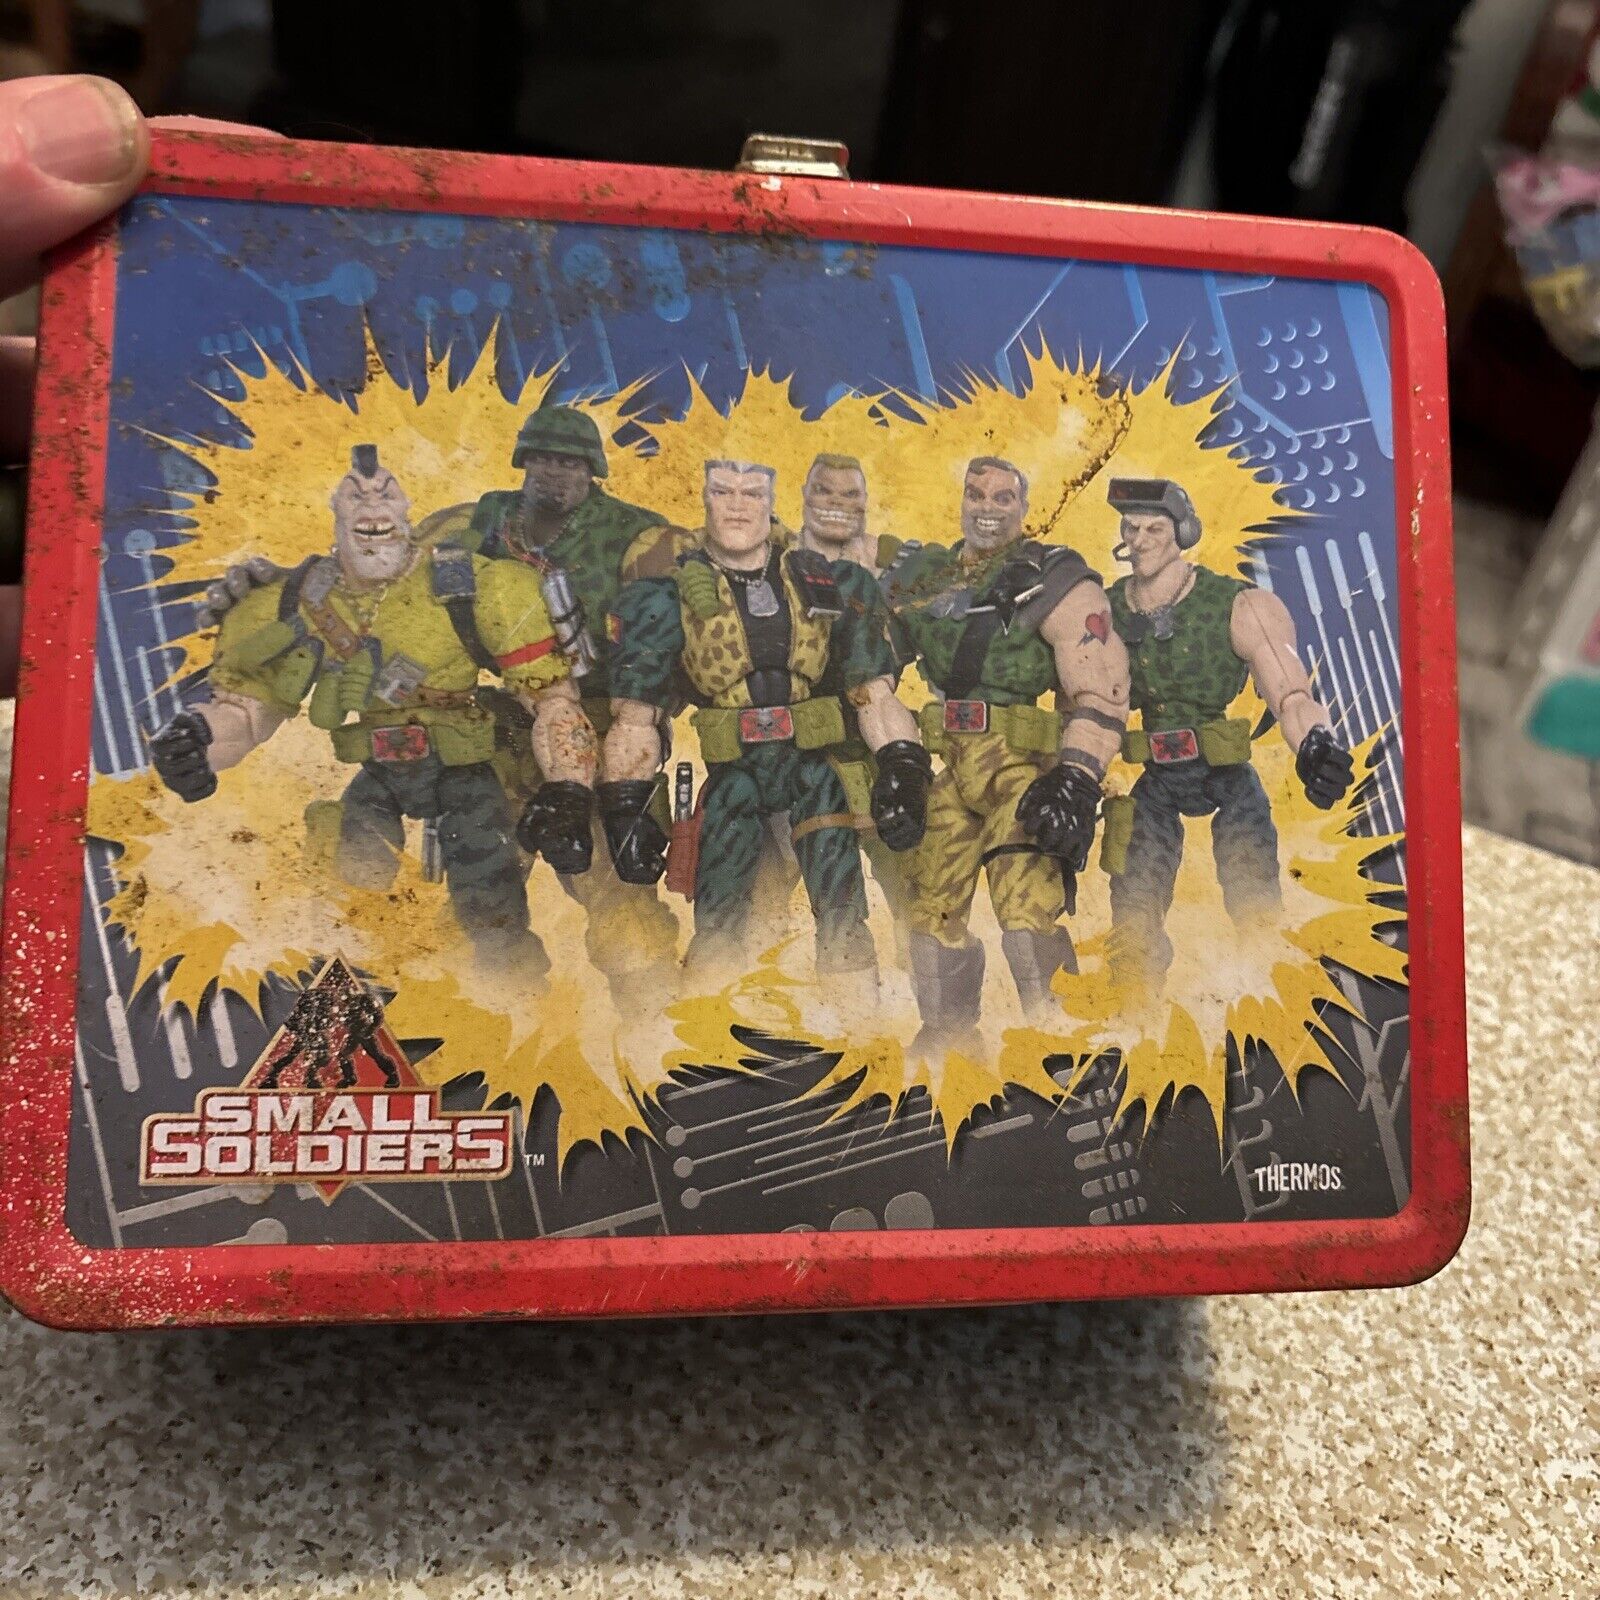 1998 Vintage Small Soldiers Metal Lunchbox with Thermos Complete Nice